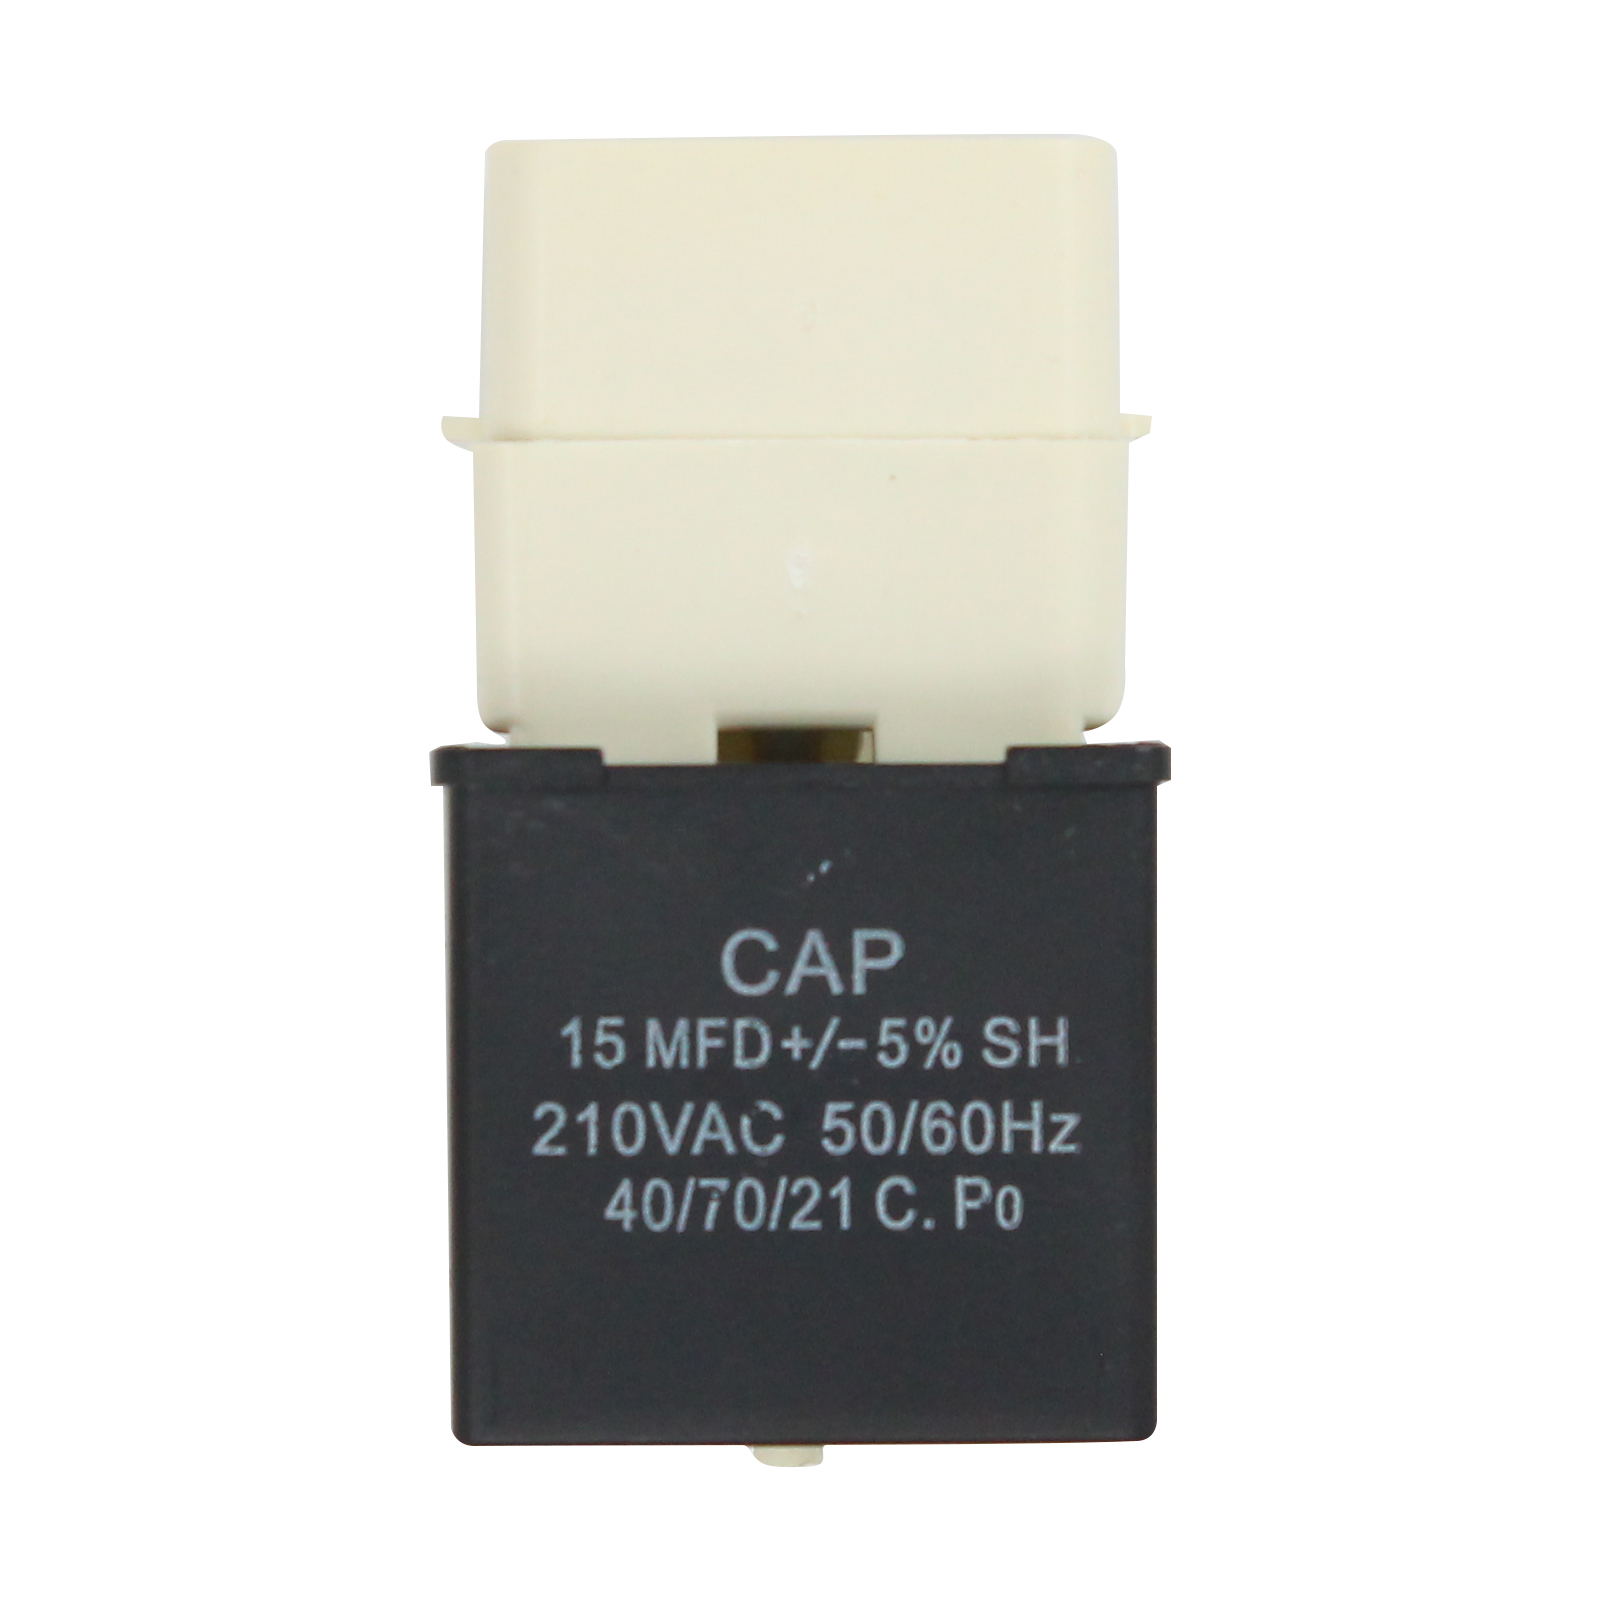 W10613606 Refrigerator Compressor Start Relay & Capacitor Replacement for Amana SXD25NP2L (P1162428W L) Refrigerator - Compatible with W10613606 Start Device Relay Overload With Capacitor - image 2 of 4